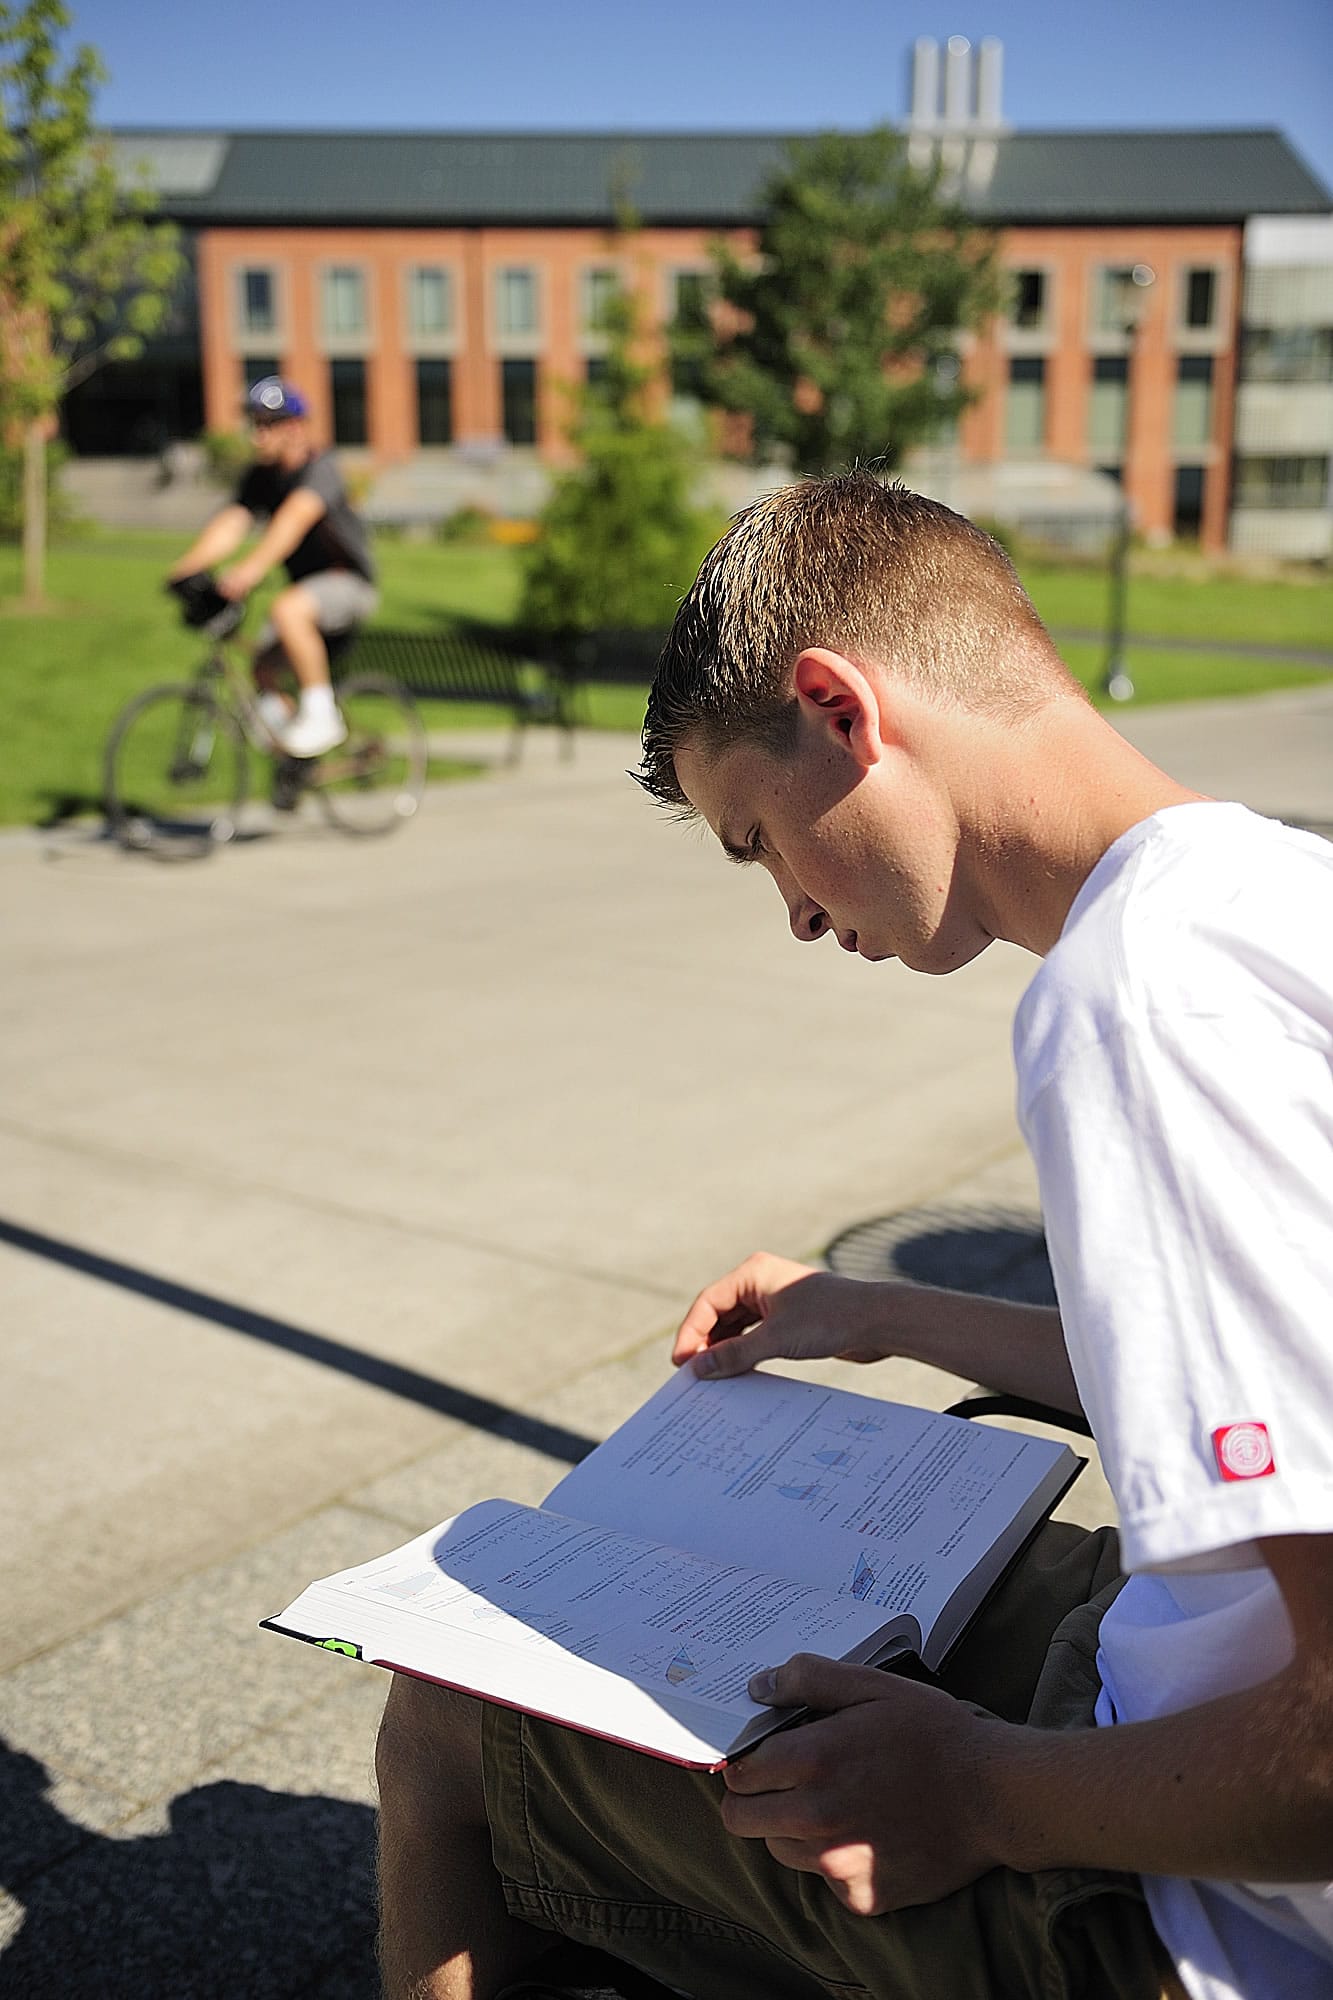 Lason Matson, a freshman from Yacolt, reviews a calculus book after attending his first class in mechanical engineering at Washington State University Vancouver as classes started Monday morning August 23, 2010.